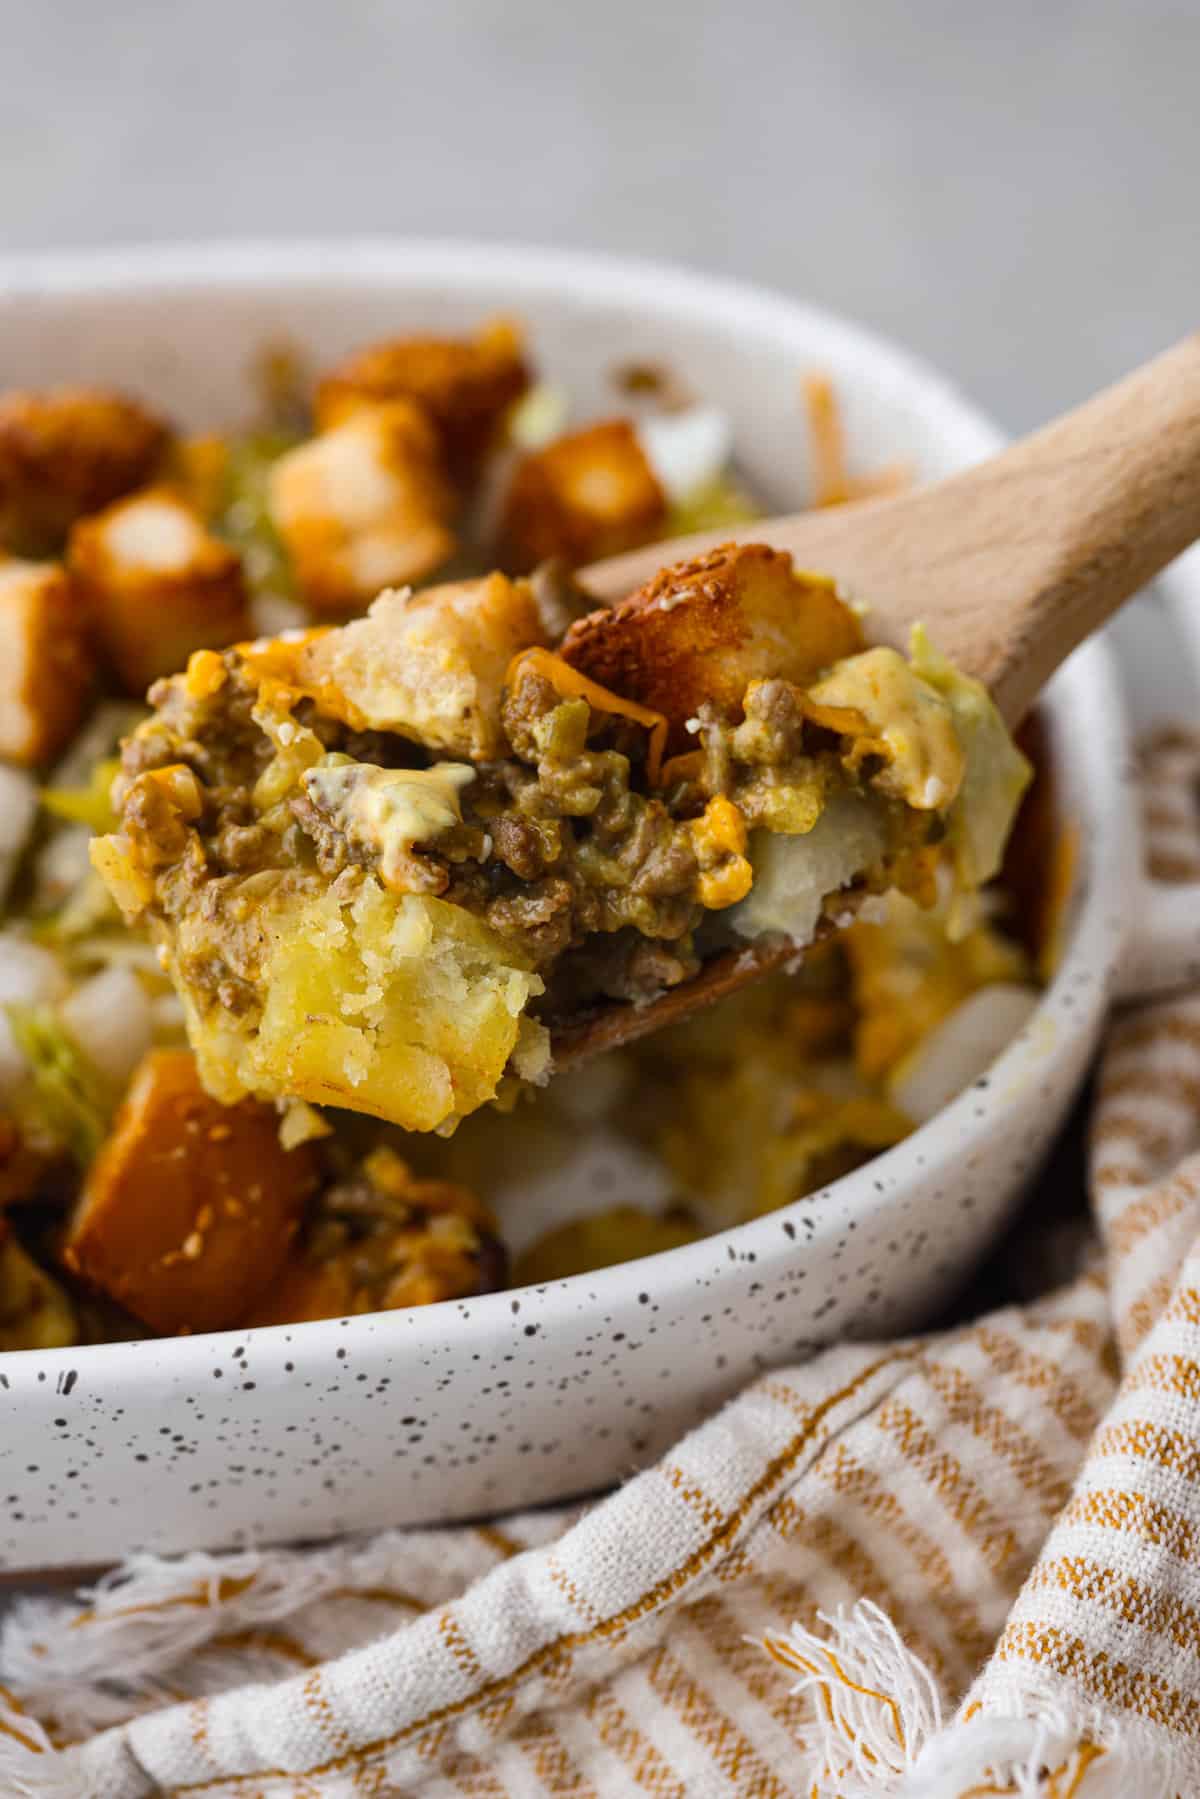 A spoon lifts a portion of shepherd's pie from a speckled bowl, showing layers of minced meat and vegetables topped with golden-brown mashed potatoes, making it an easy dinner idea for busy families